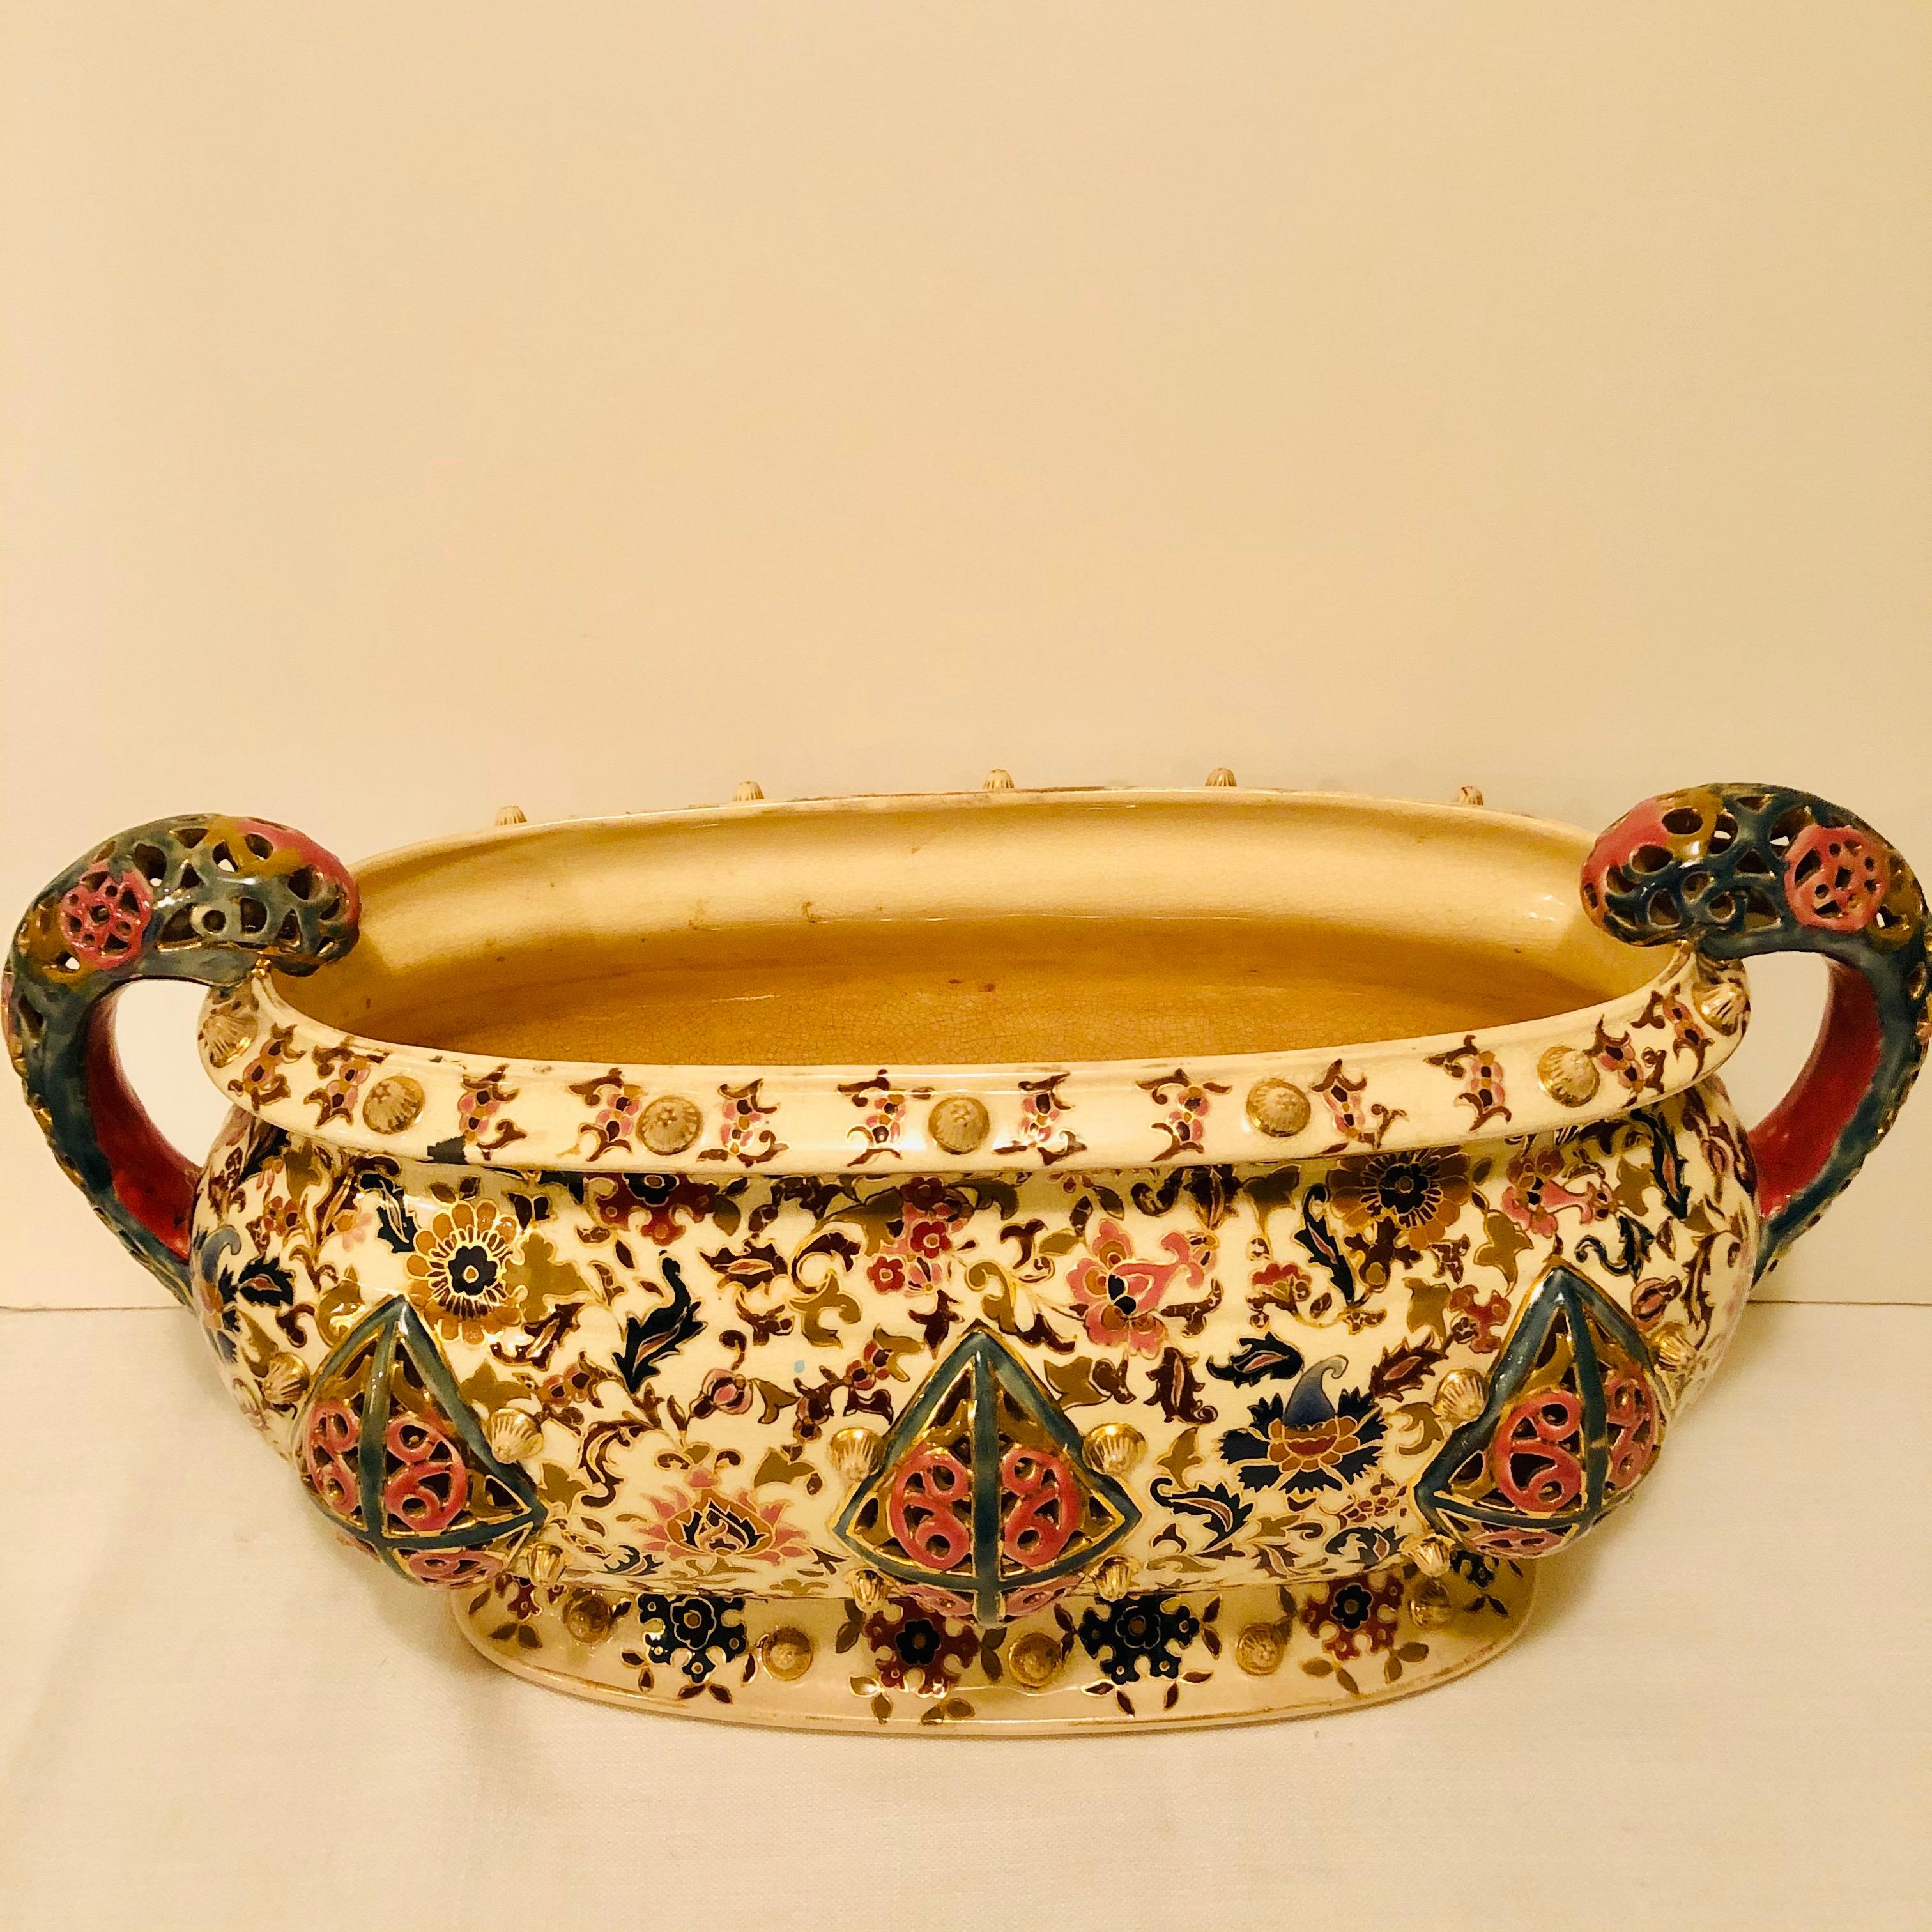 Hand-Painted Fischer Budapest Centerpiece with Reticulated Handles and Panels & Bright Colors